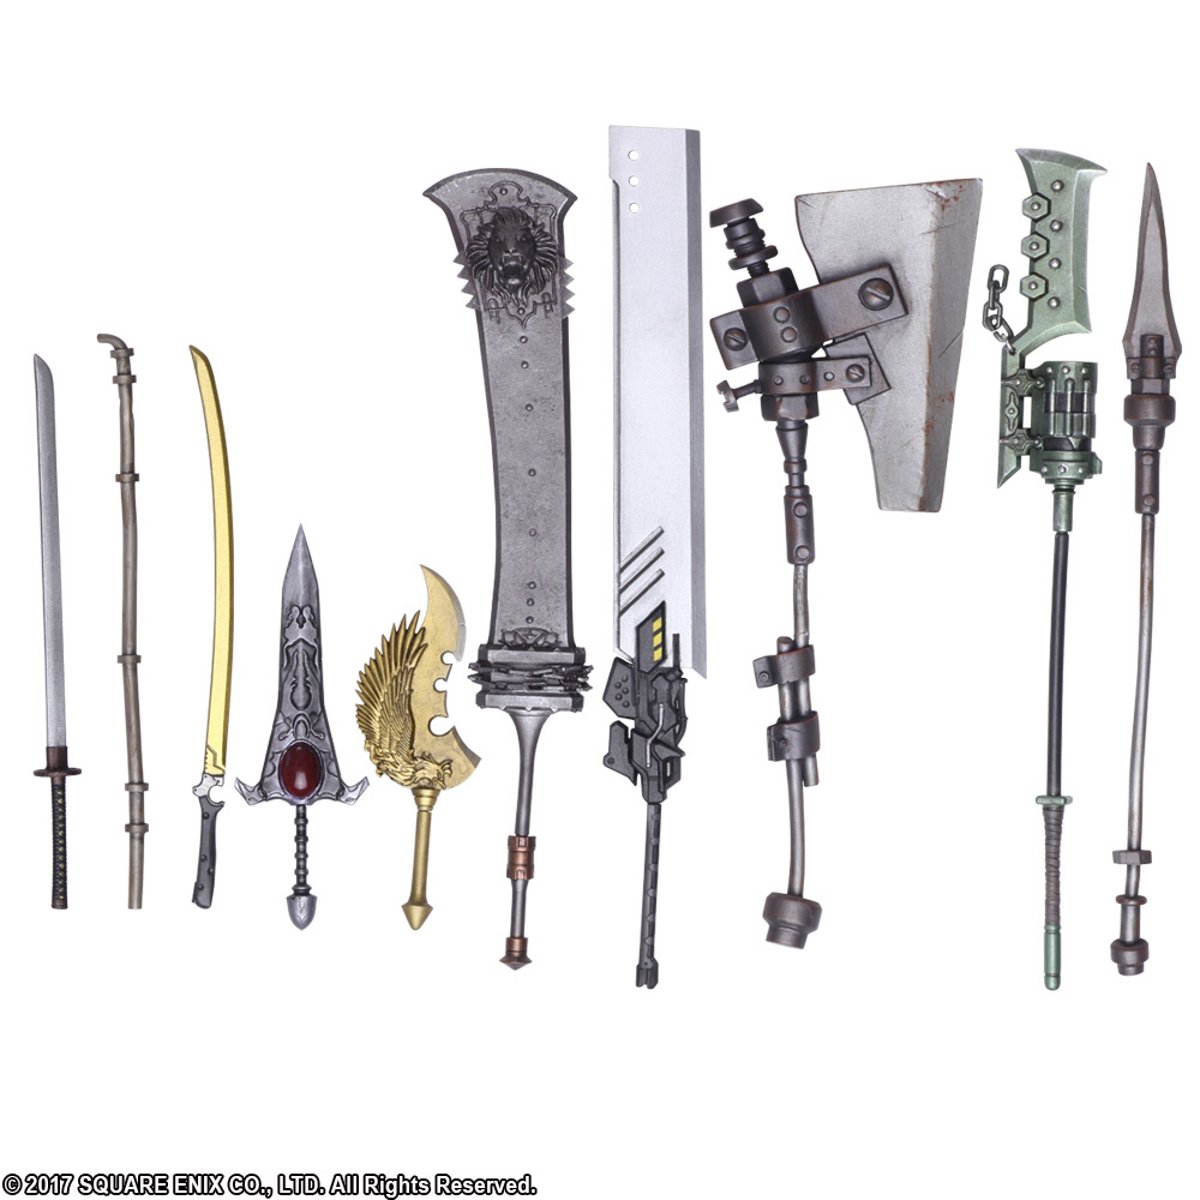 Nier Automata Bring Arts 5 YoRHa-Issue Blade Figure Weapon Trading Collection